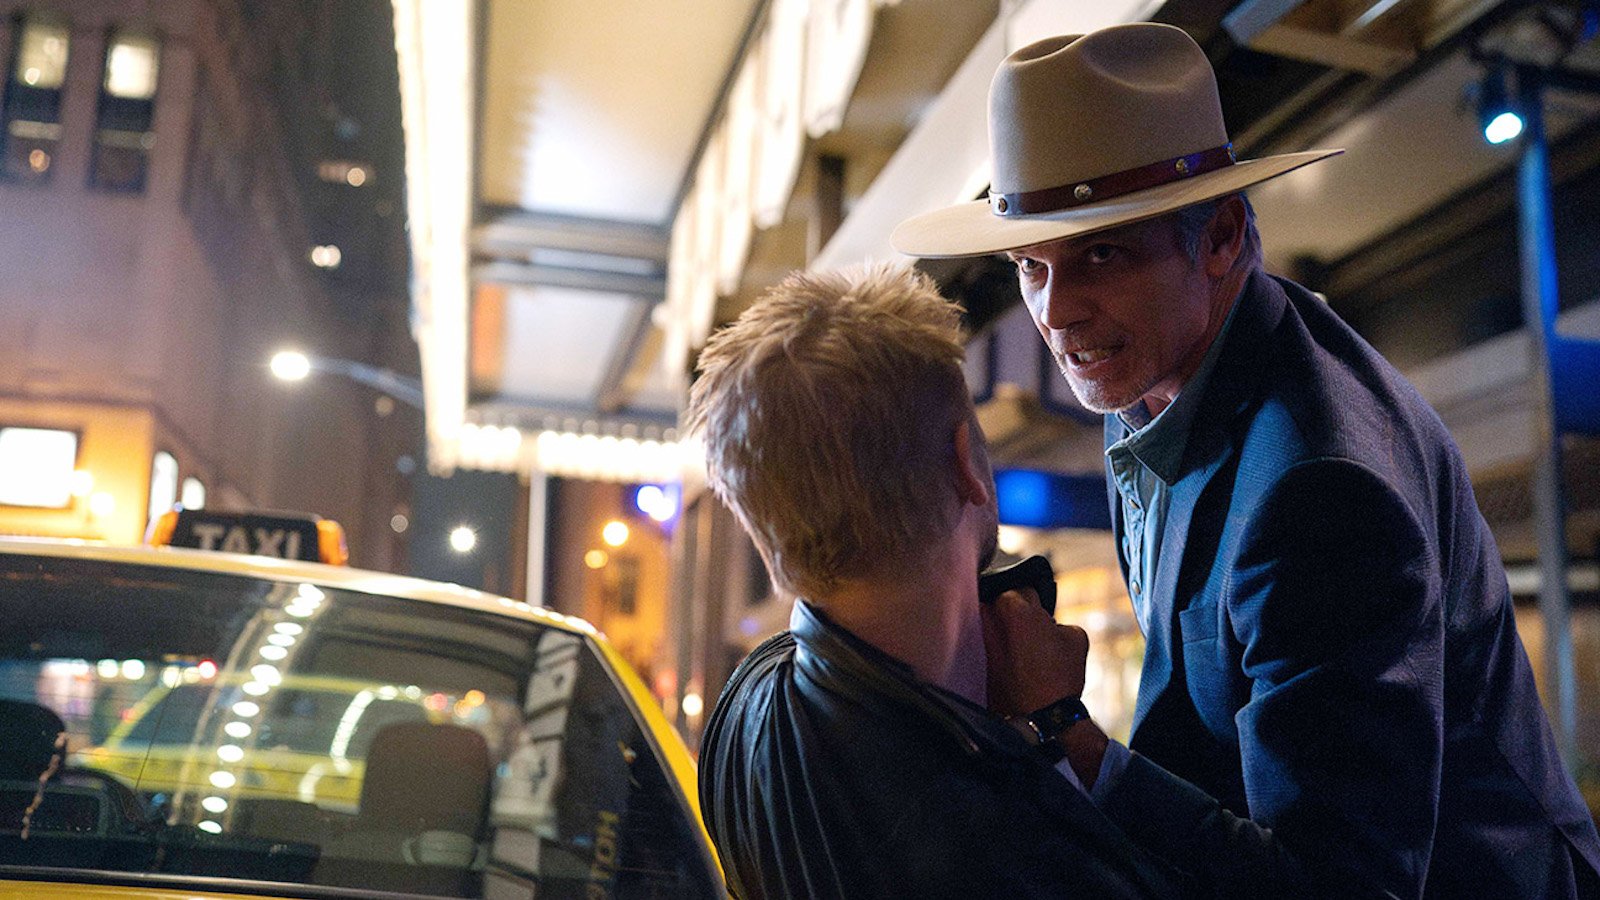 Justified: City Primeval, Timothy Olyphant starts manhunt in revival trailer